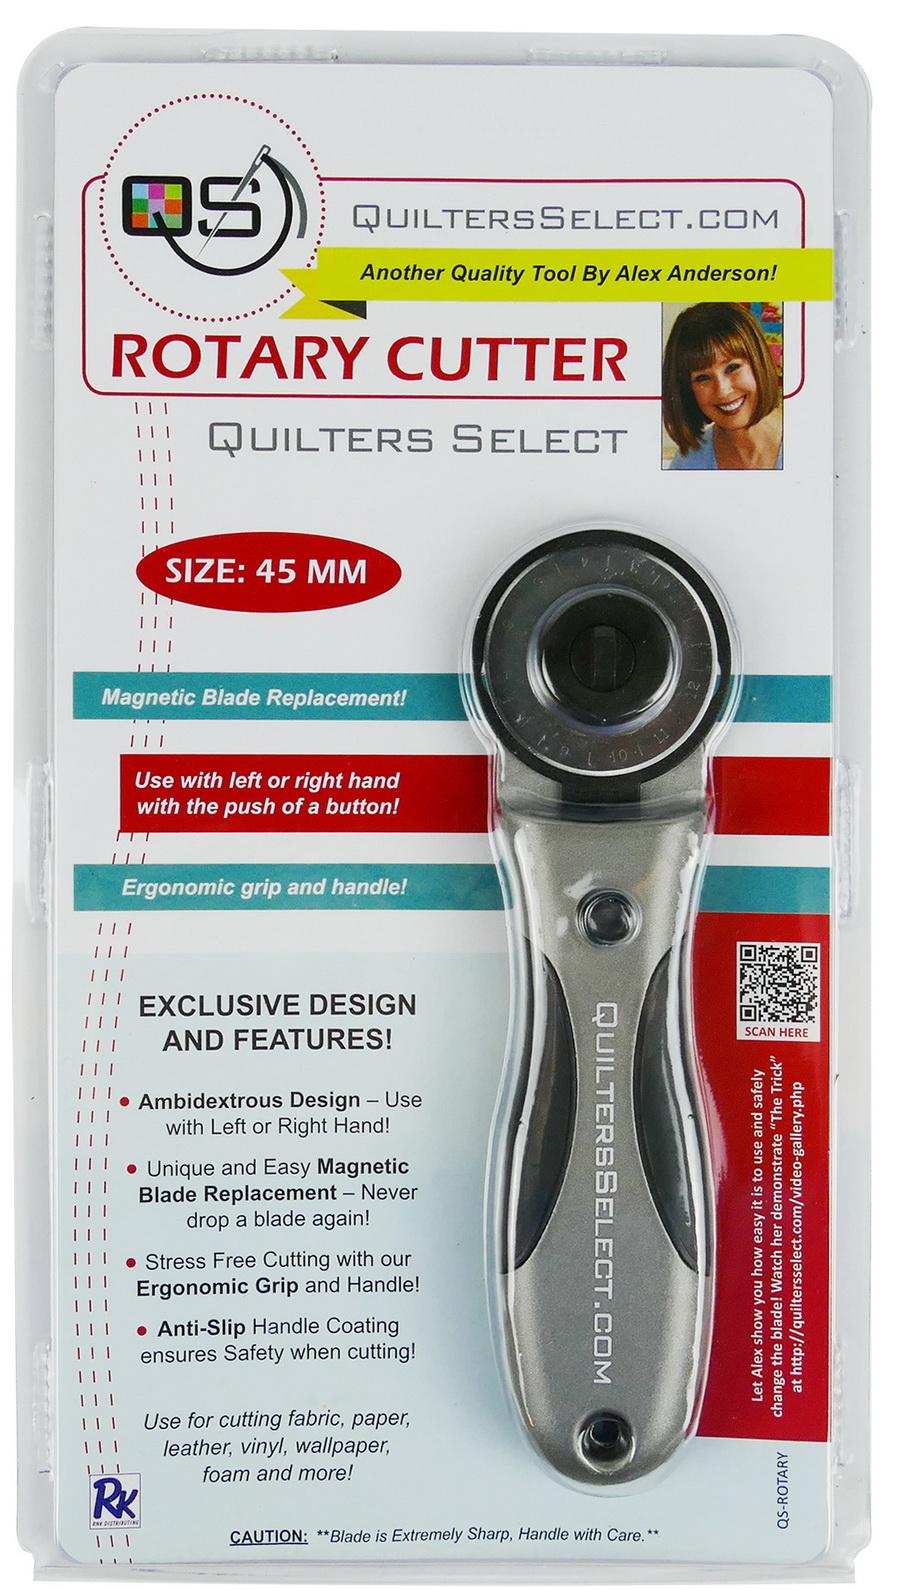 https://imagecdn.sewingmachinesplus.com/media/products/quilters-select/qs-rotary/watermarked/1.jpg